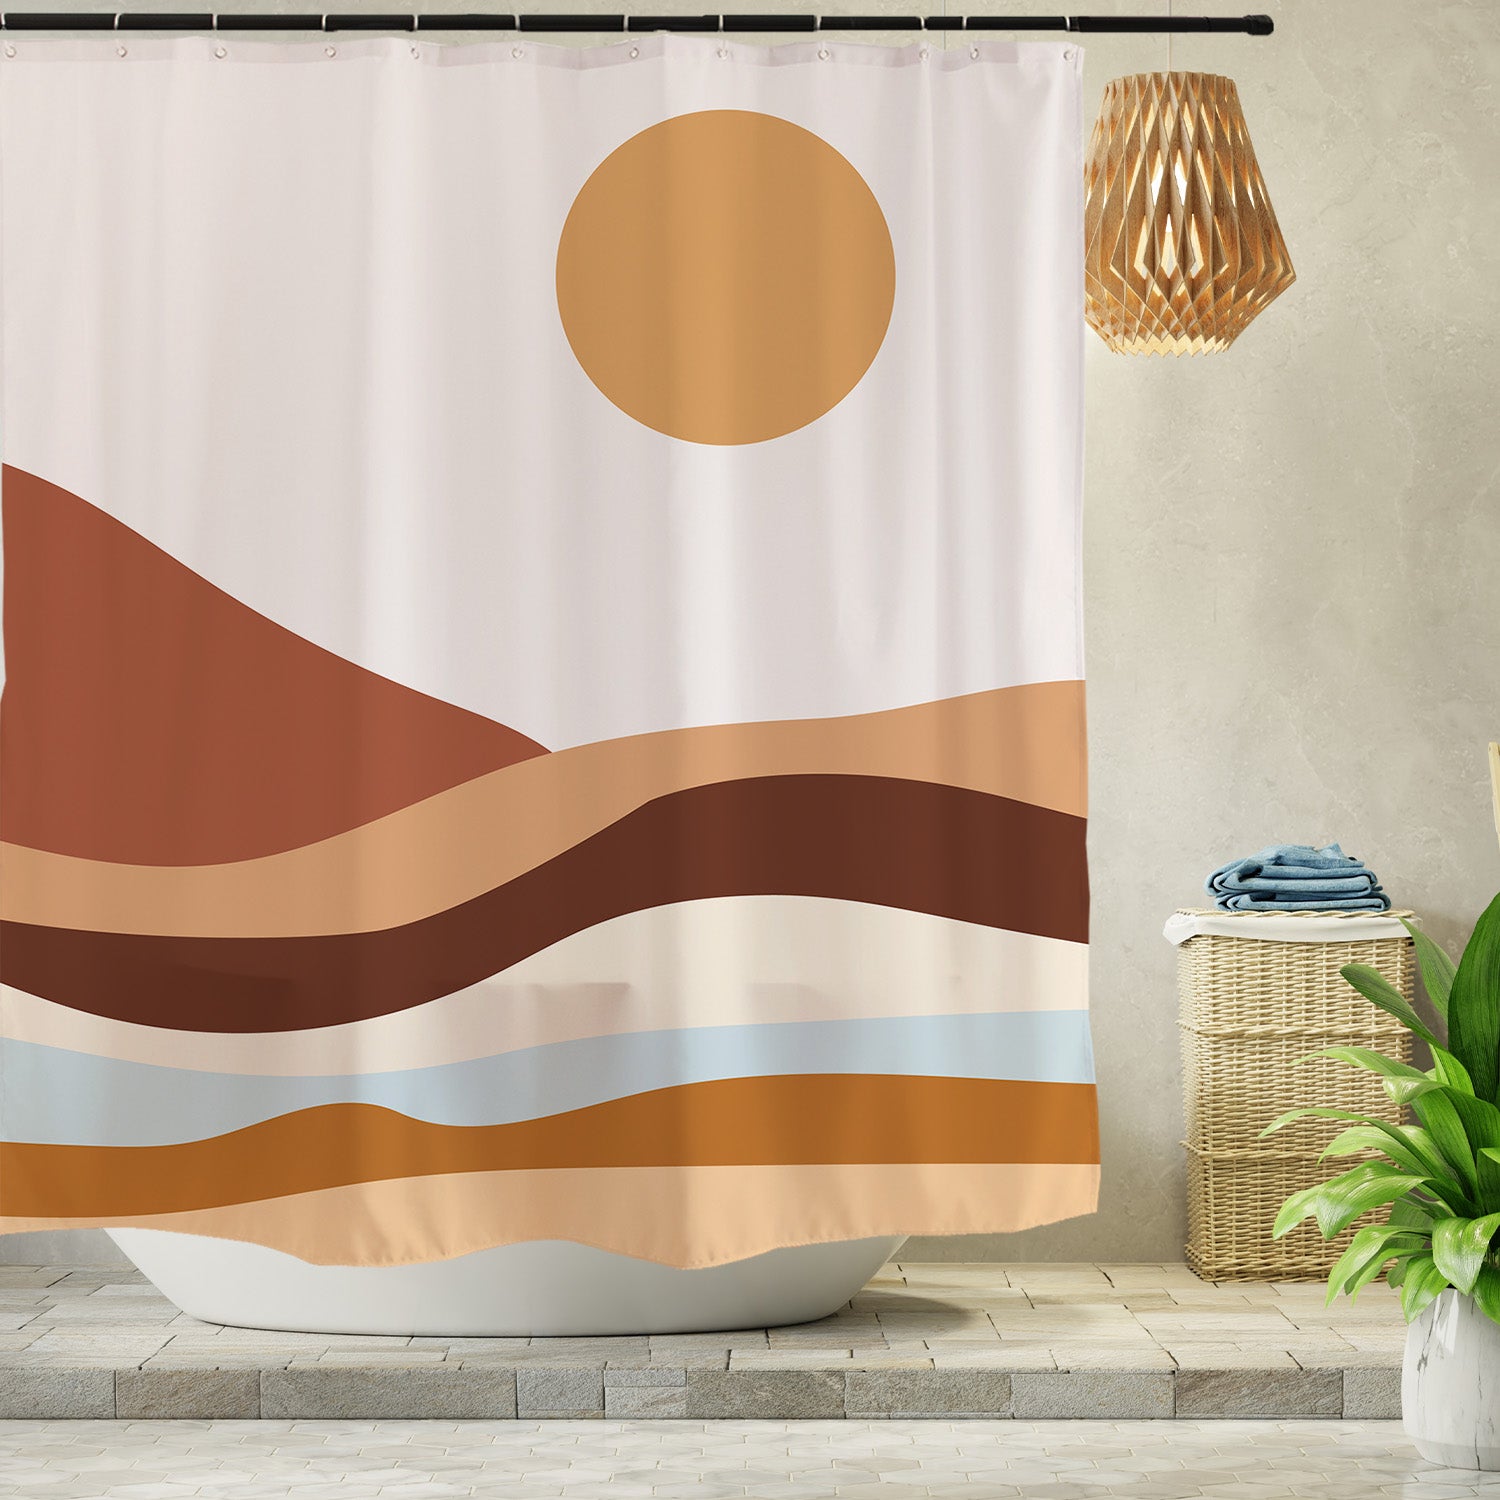 Feblilac Orange Mountains and Rivers Sunrise Shower Curtain with Hooks